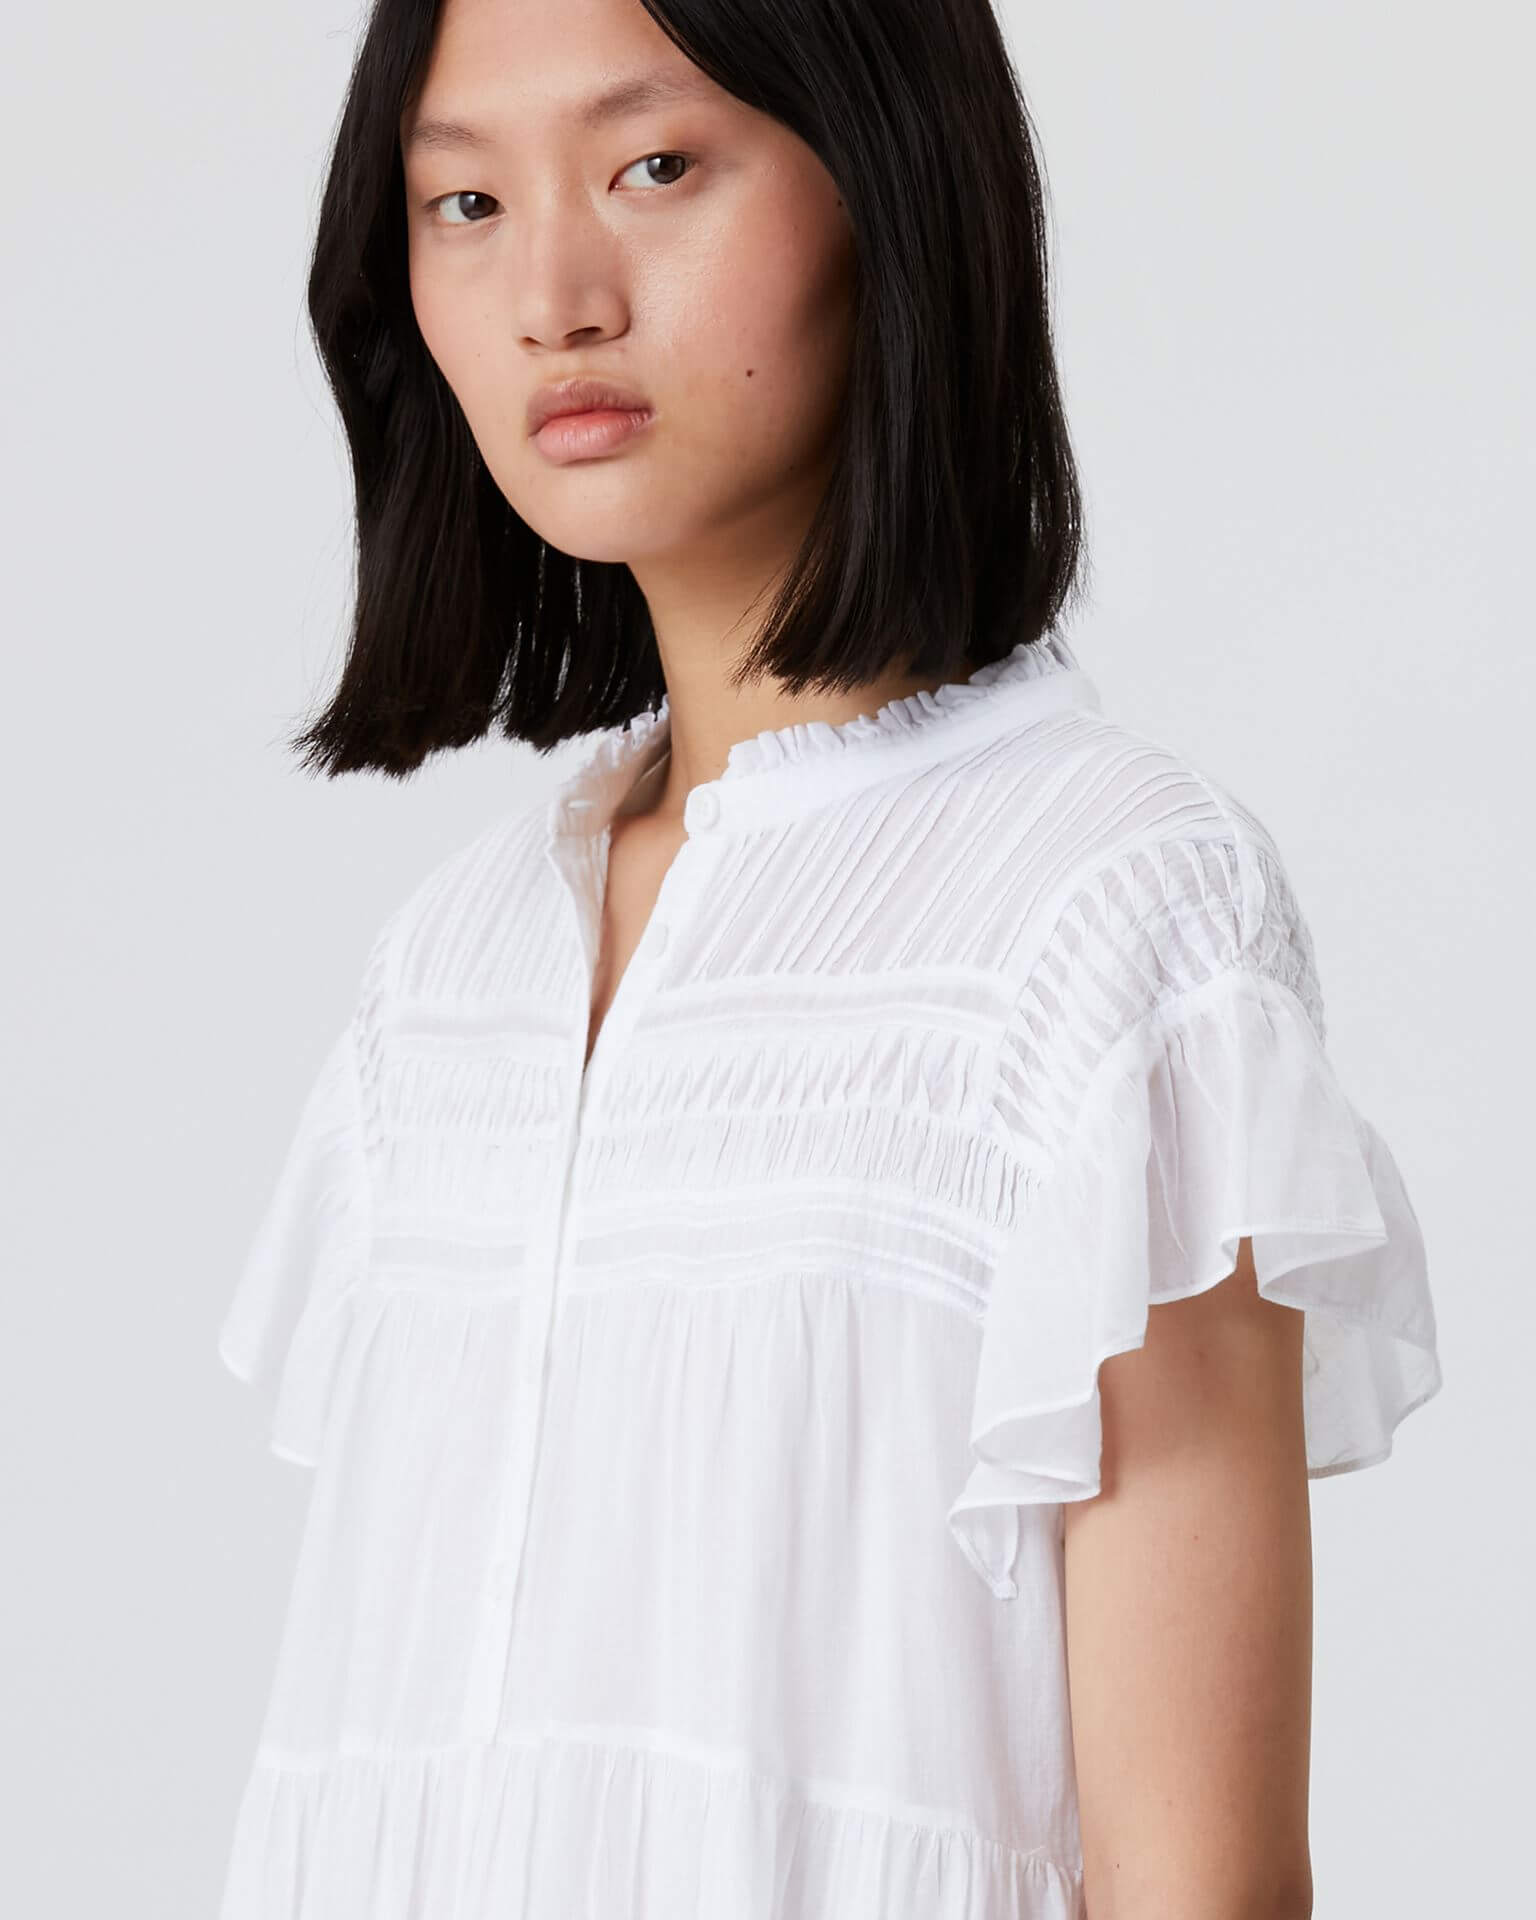 Isabel Marant Etoile Laniyake Dress in White available at TNT The New Trend Australia. Free shipping on orders over $300 AUD.